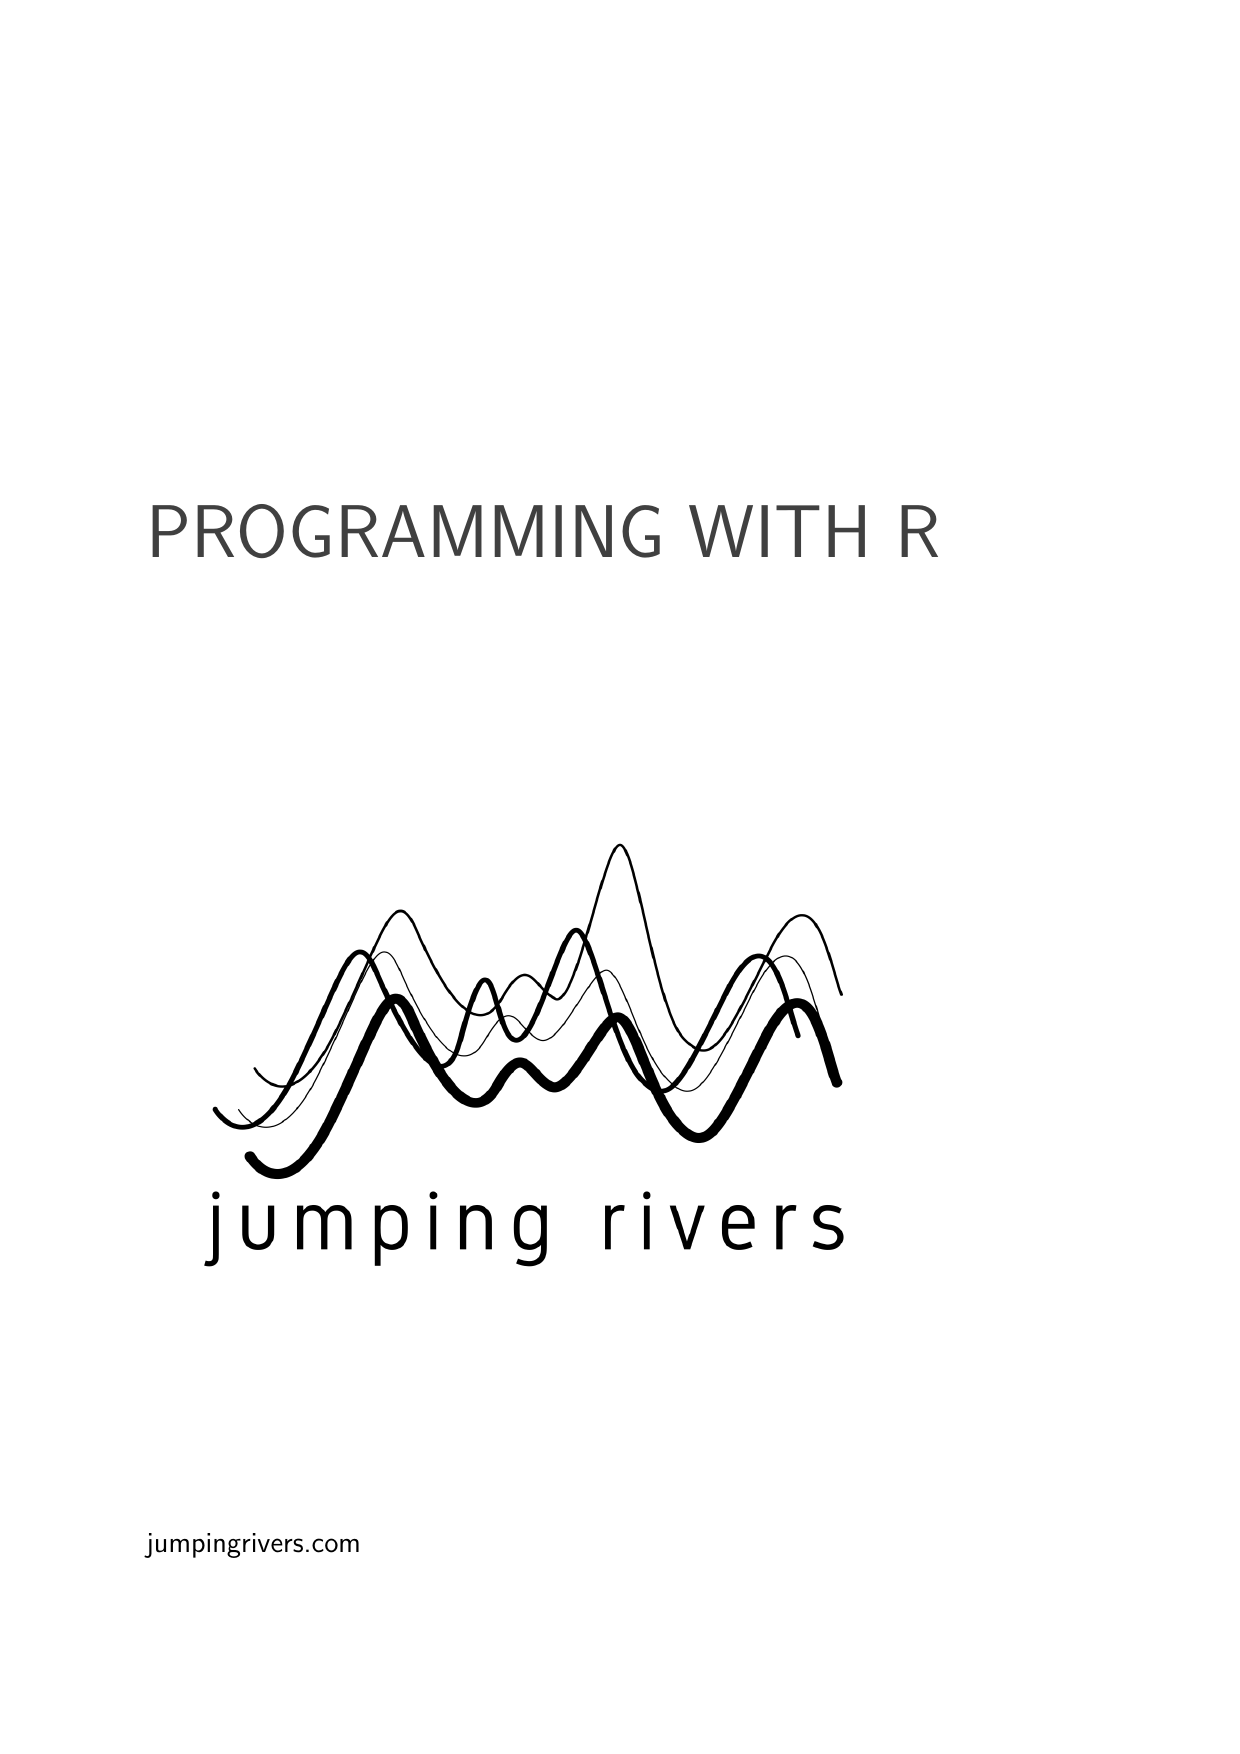 Example course material for 'Programming with R'